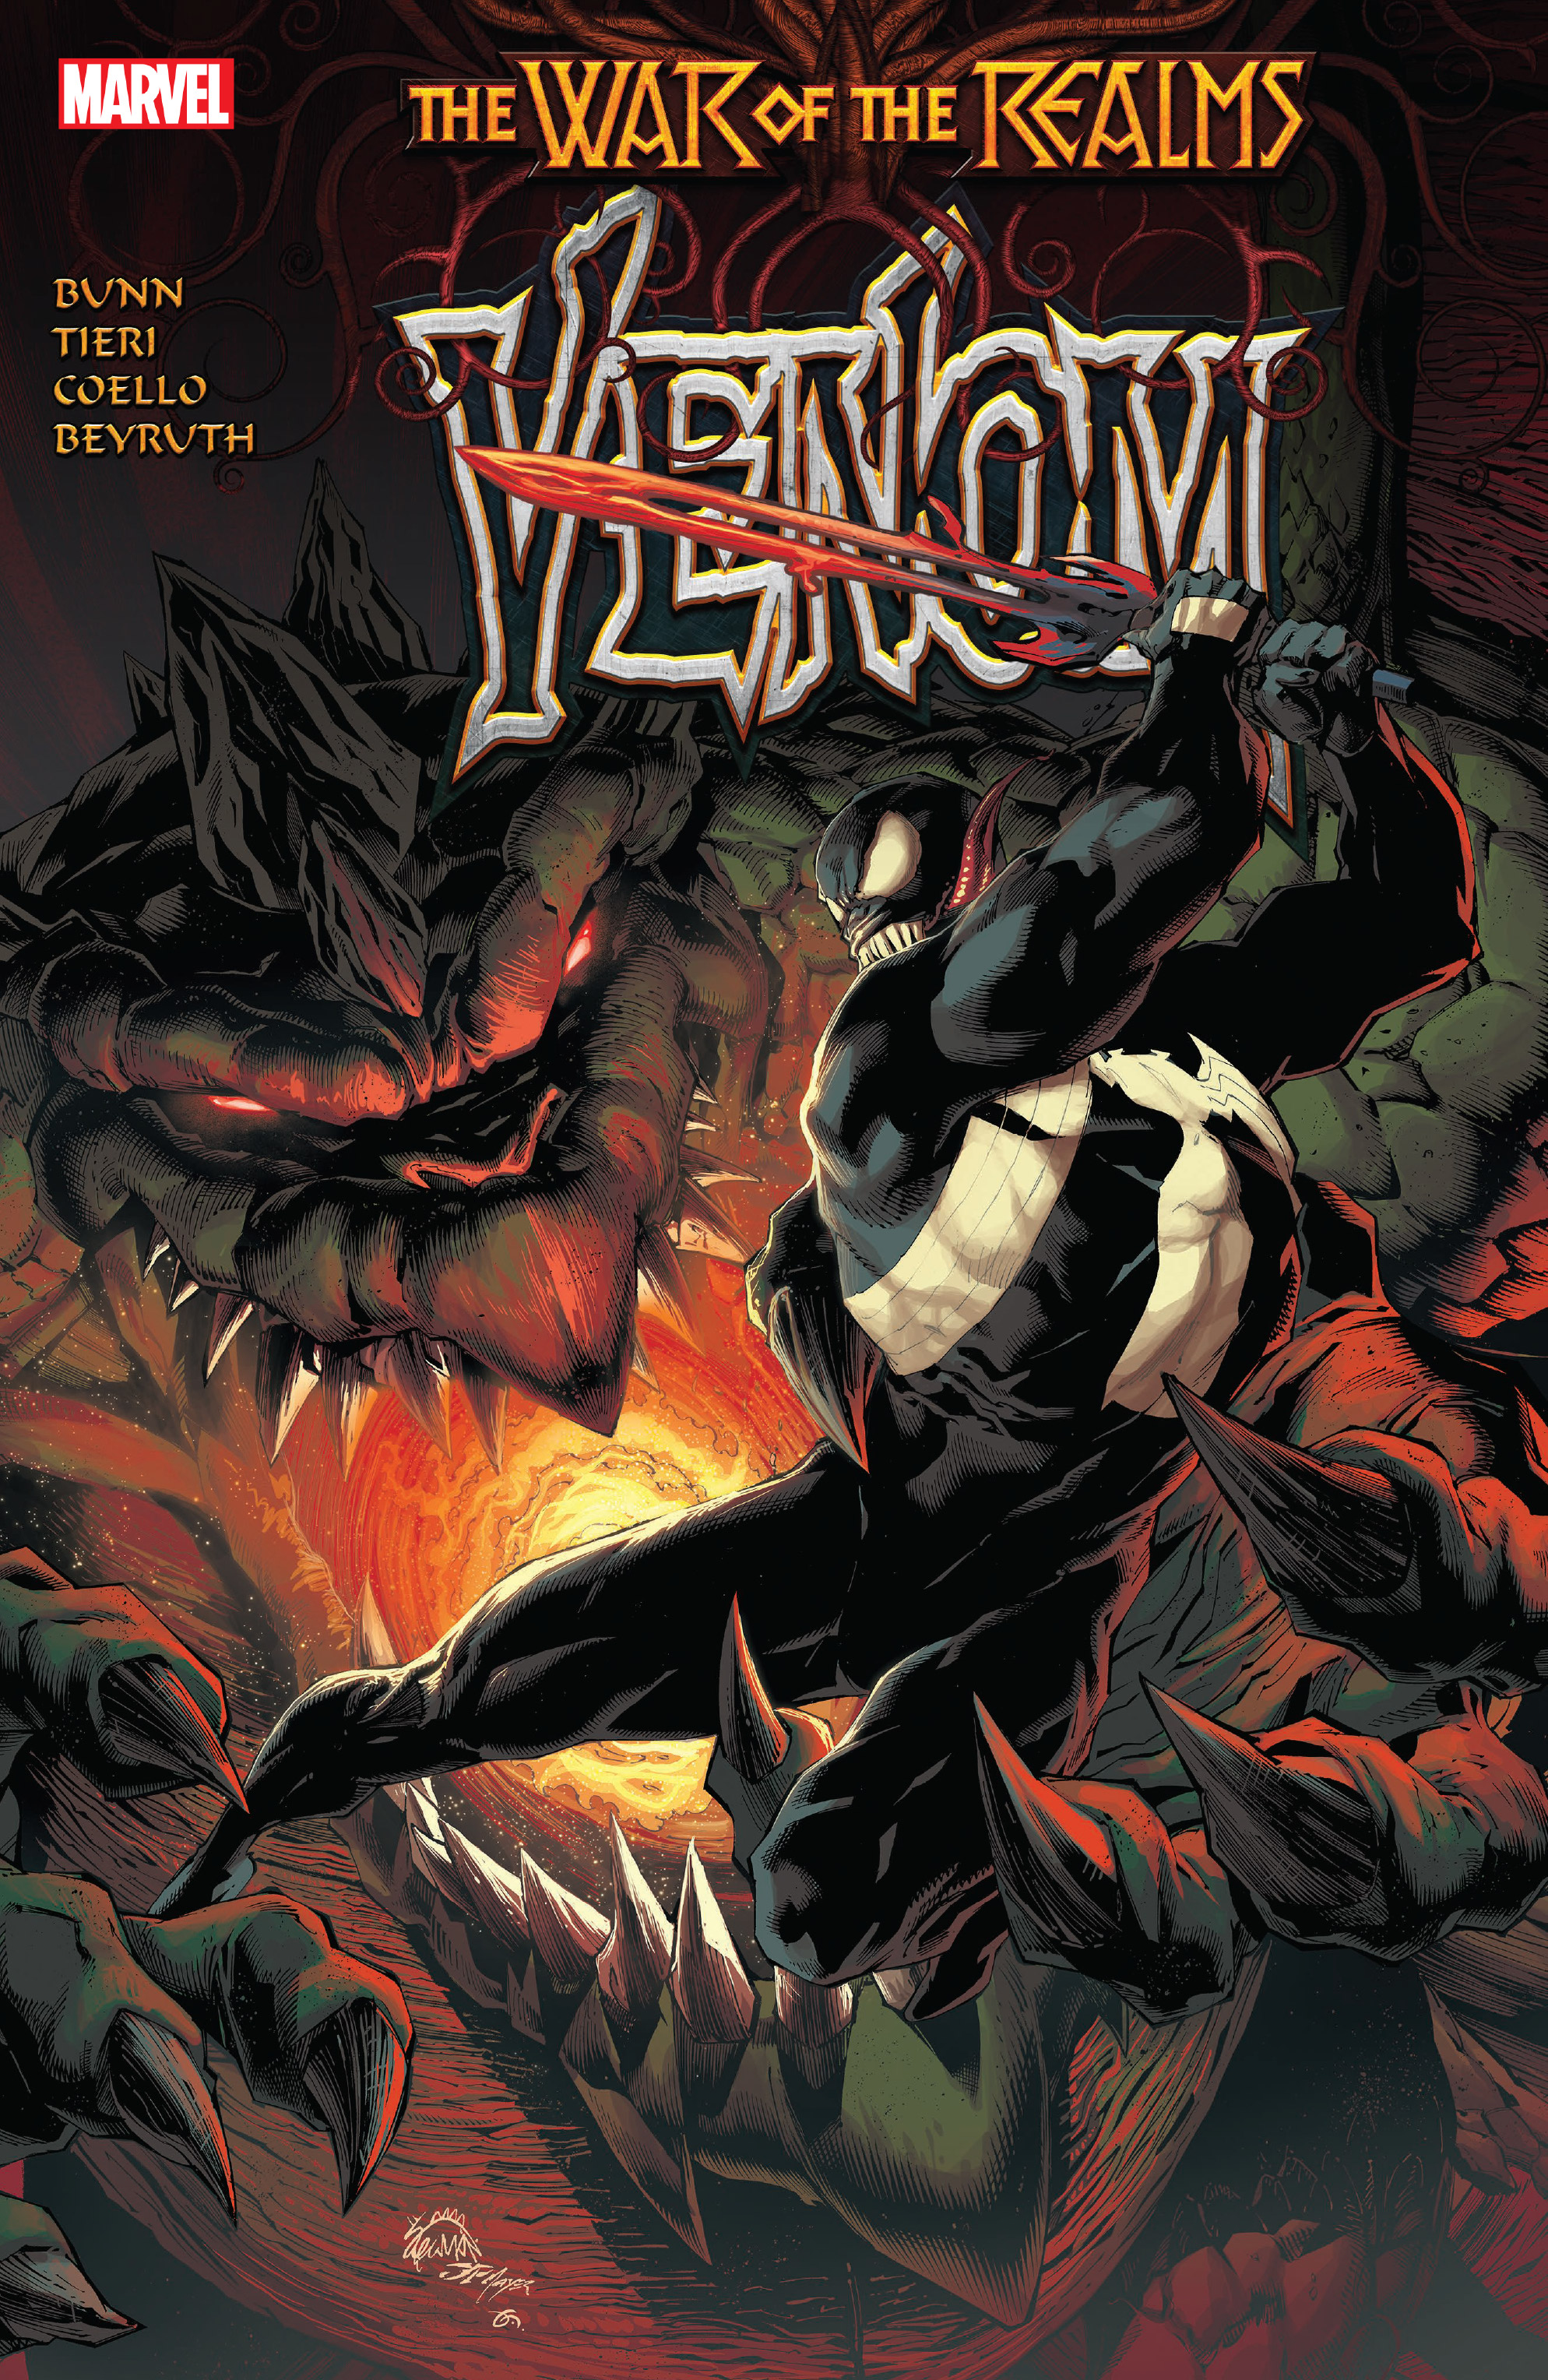 Read online Venom: War of the Realms comic -  Issue # TPB - 1